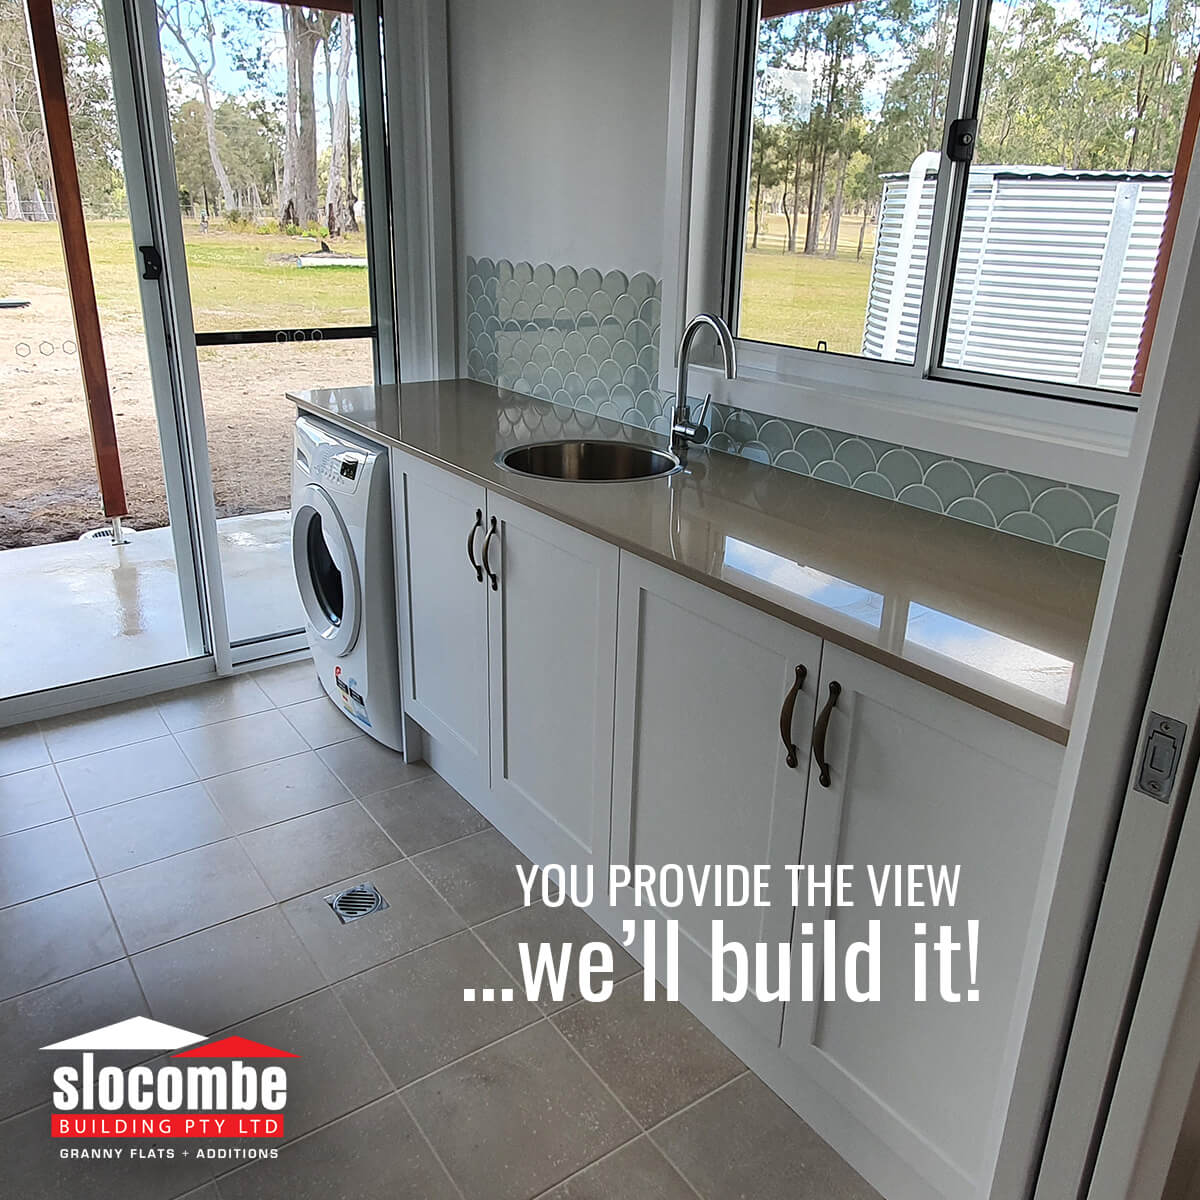 You provide the view...we'll build it. Call Slocombe Building Pty Ltd based in Port Macquarie.